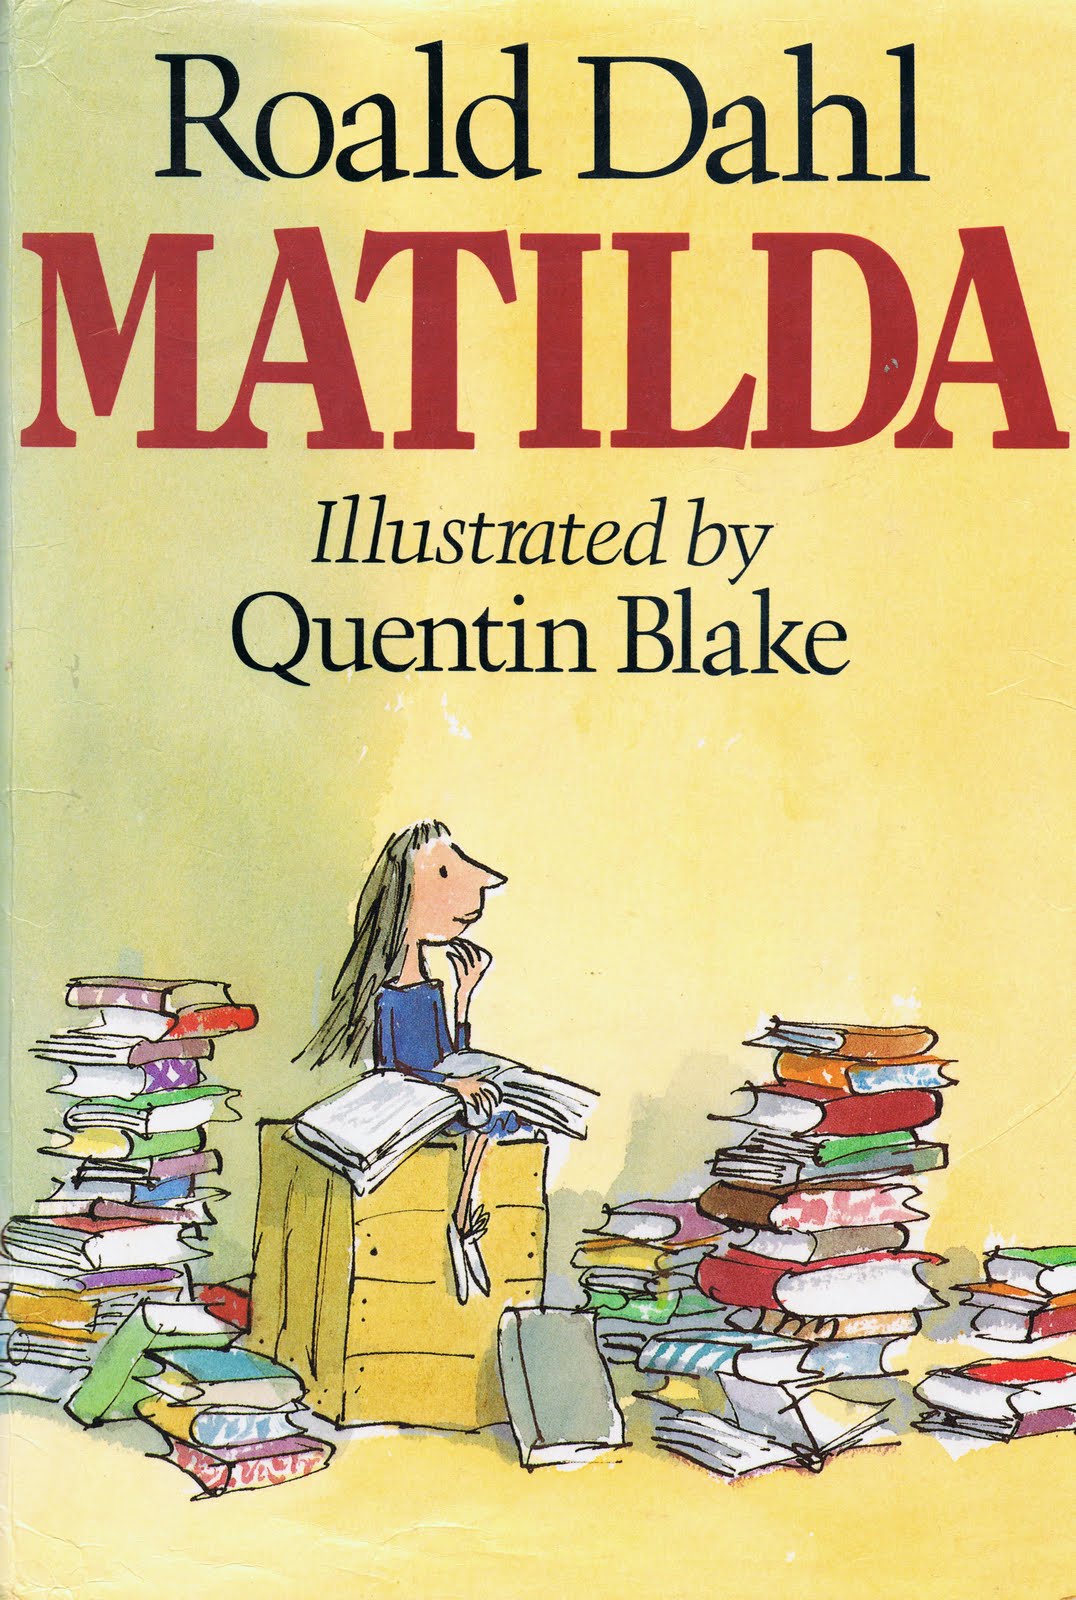 Little Library of Rescued Books: Matilda by Roald Dahl